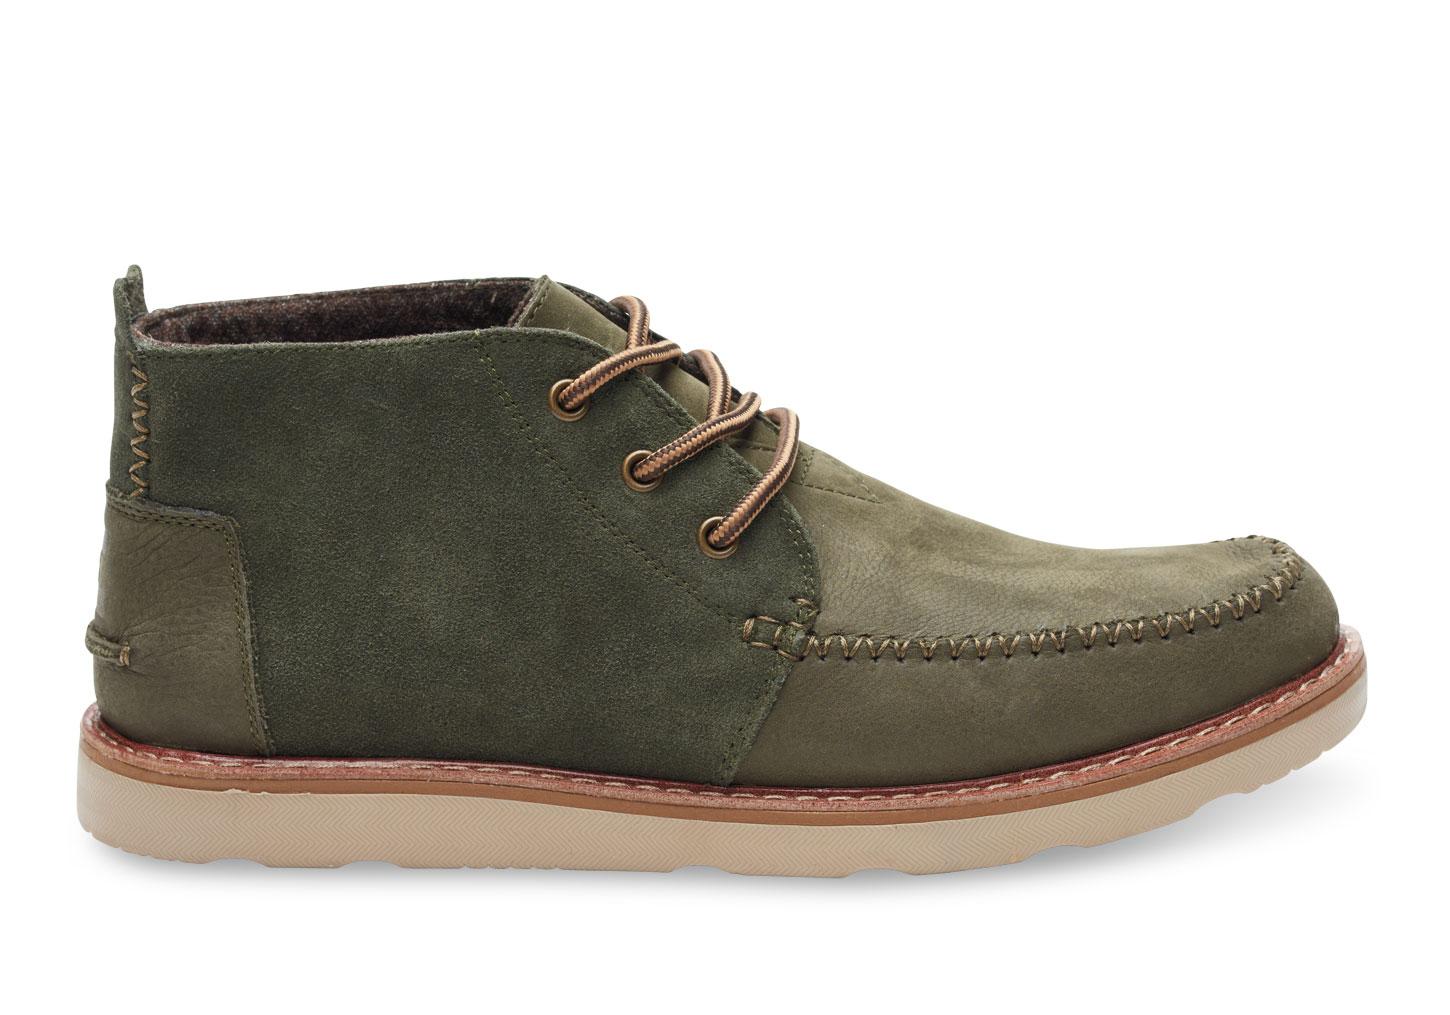 Toms Tarmac Olive Suede/full Grain Leather Men's Chukka Boots in Green ...